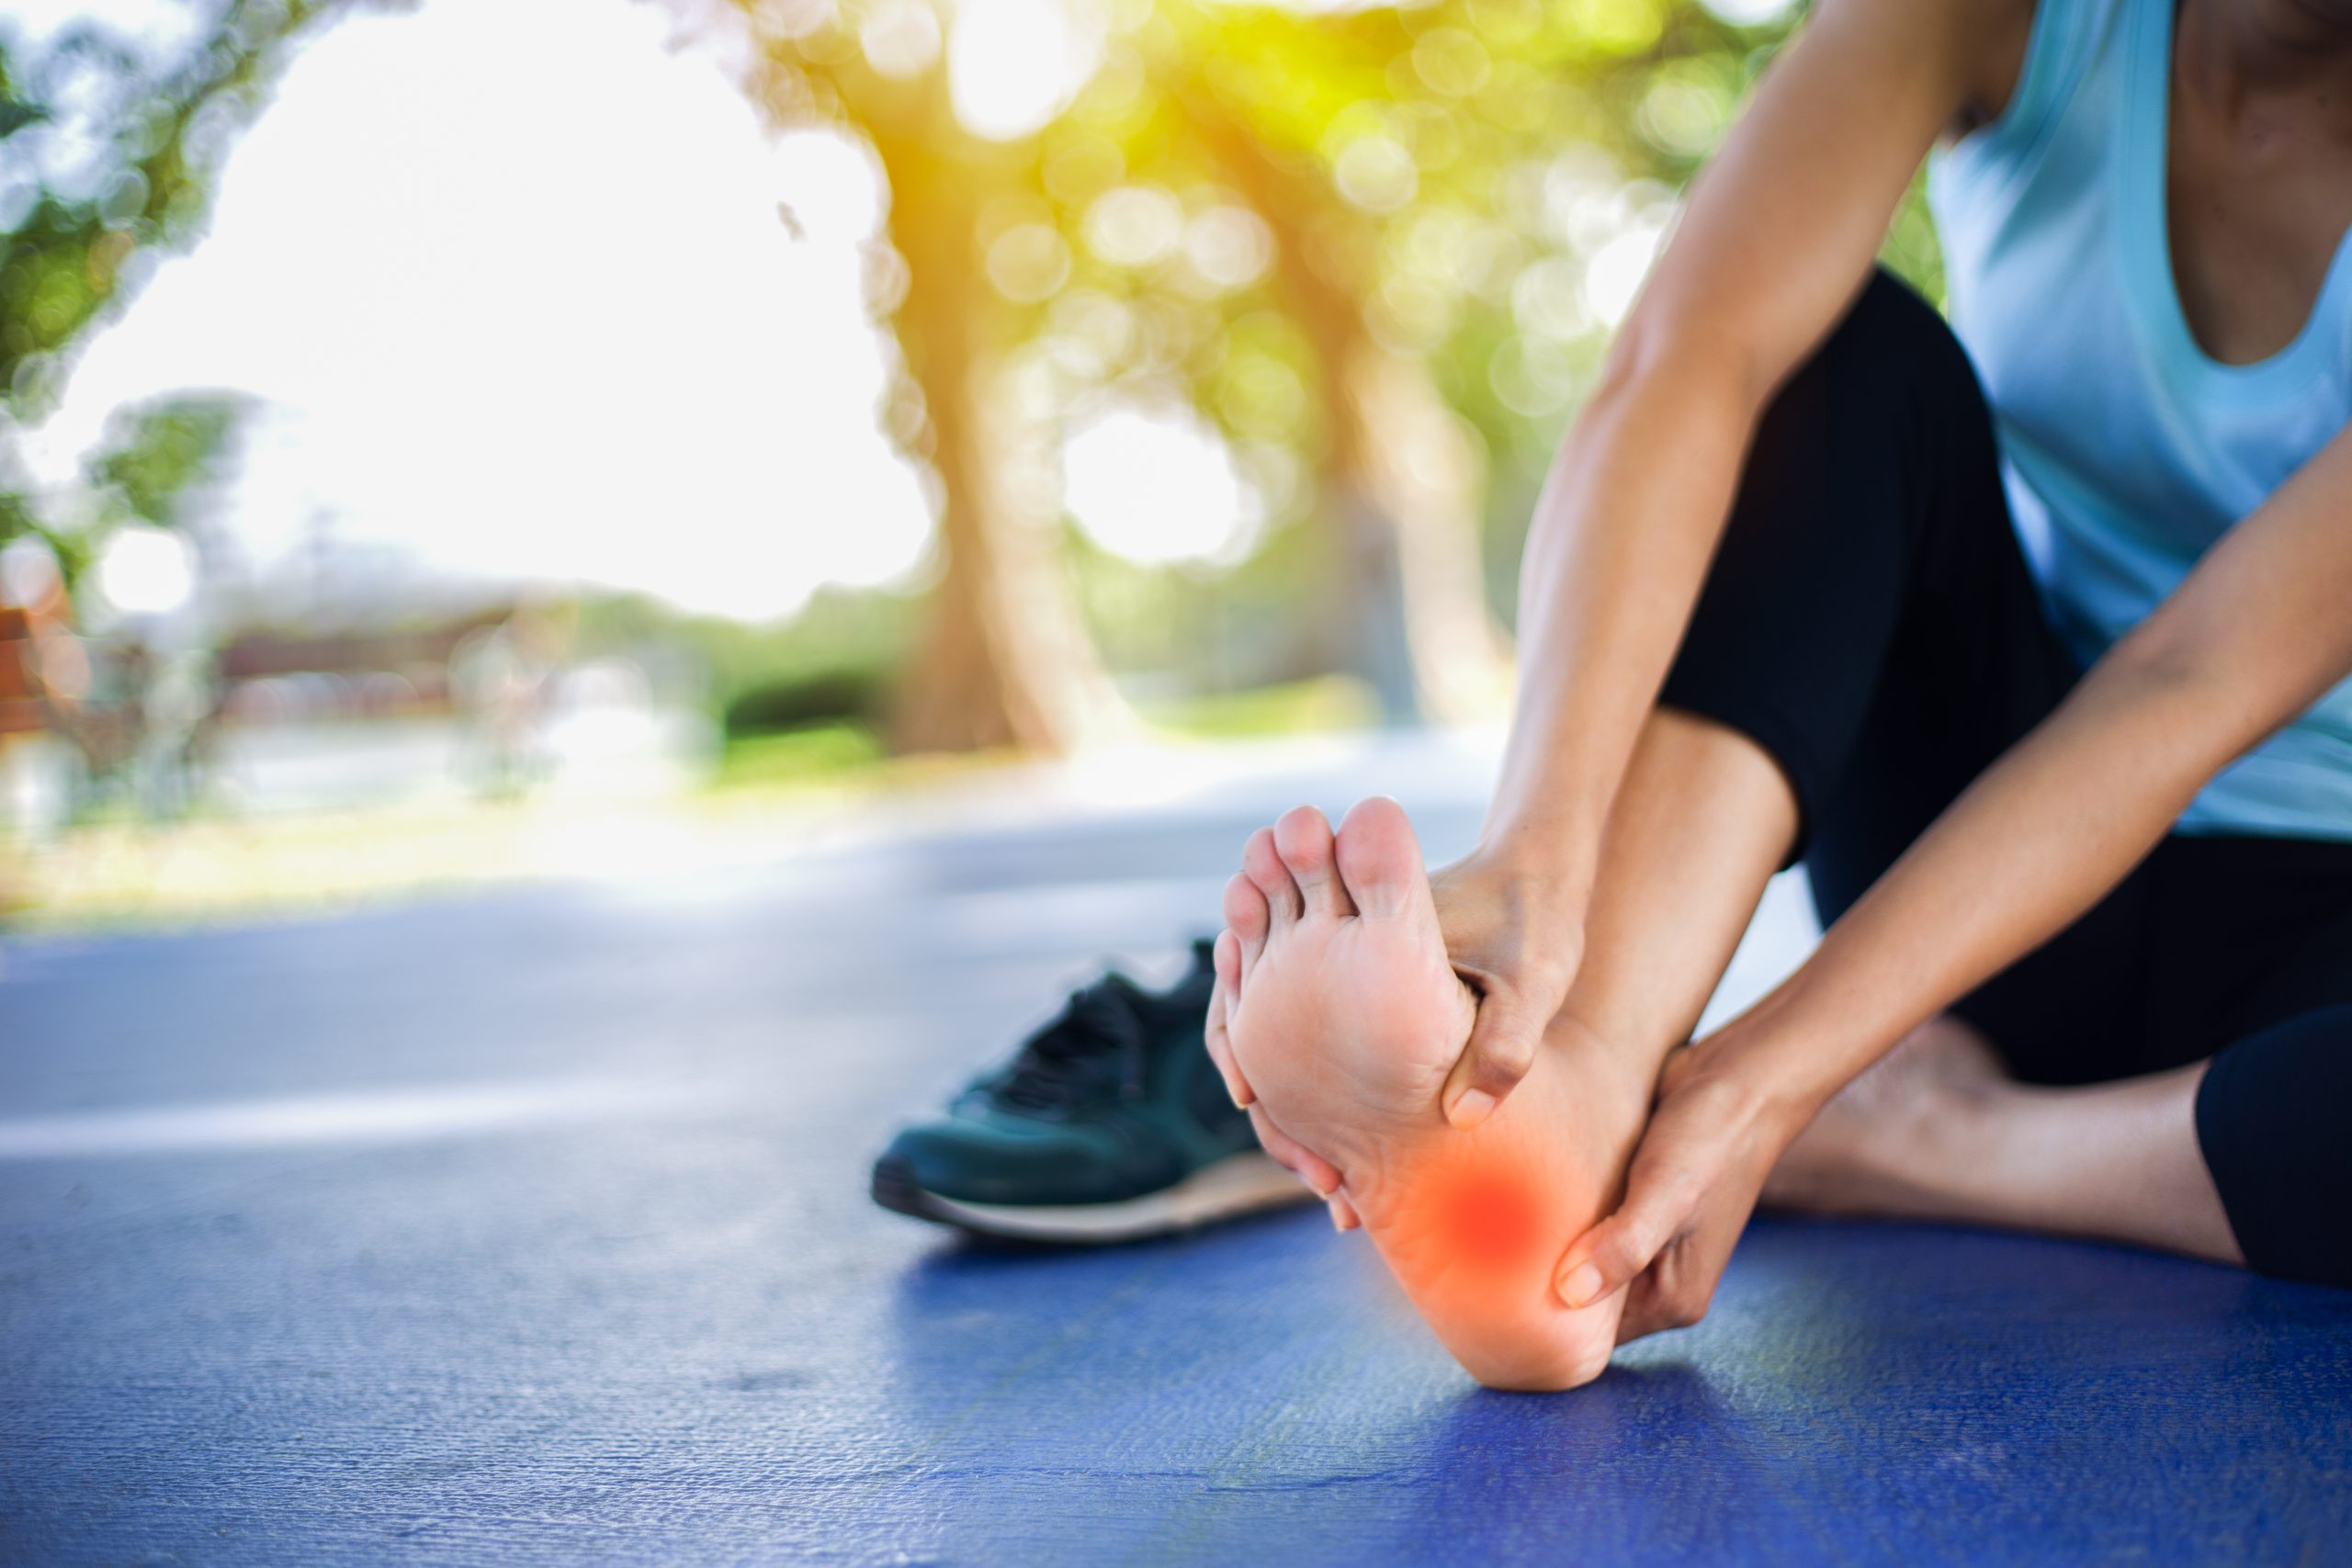 The most common foot injuries in athletes.